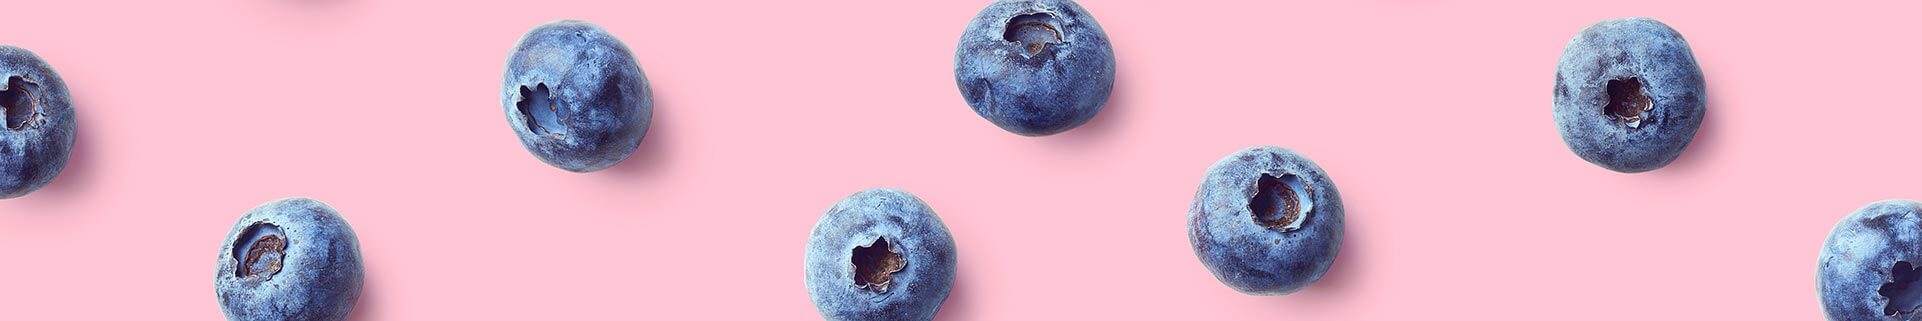 Blueberries on pink background